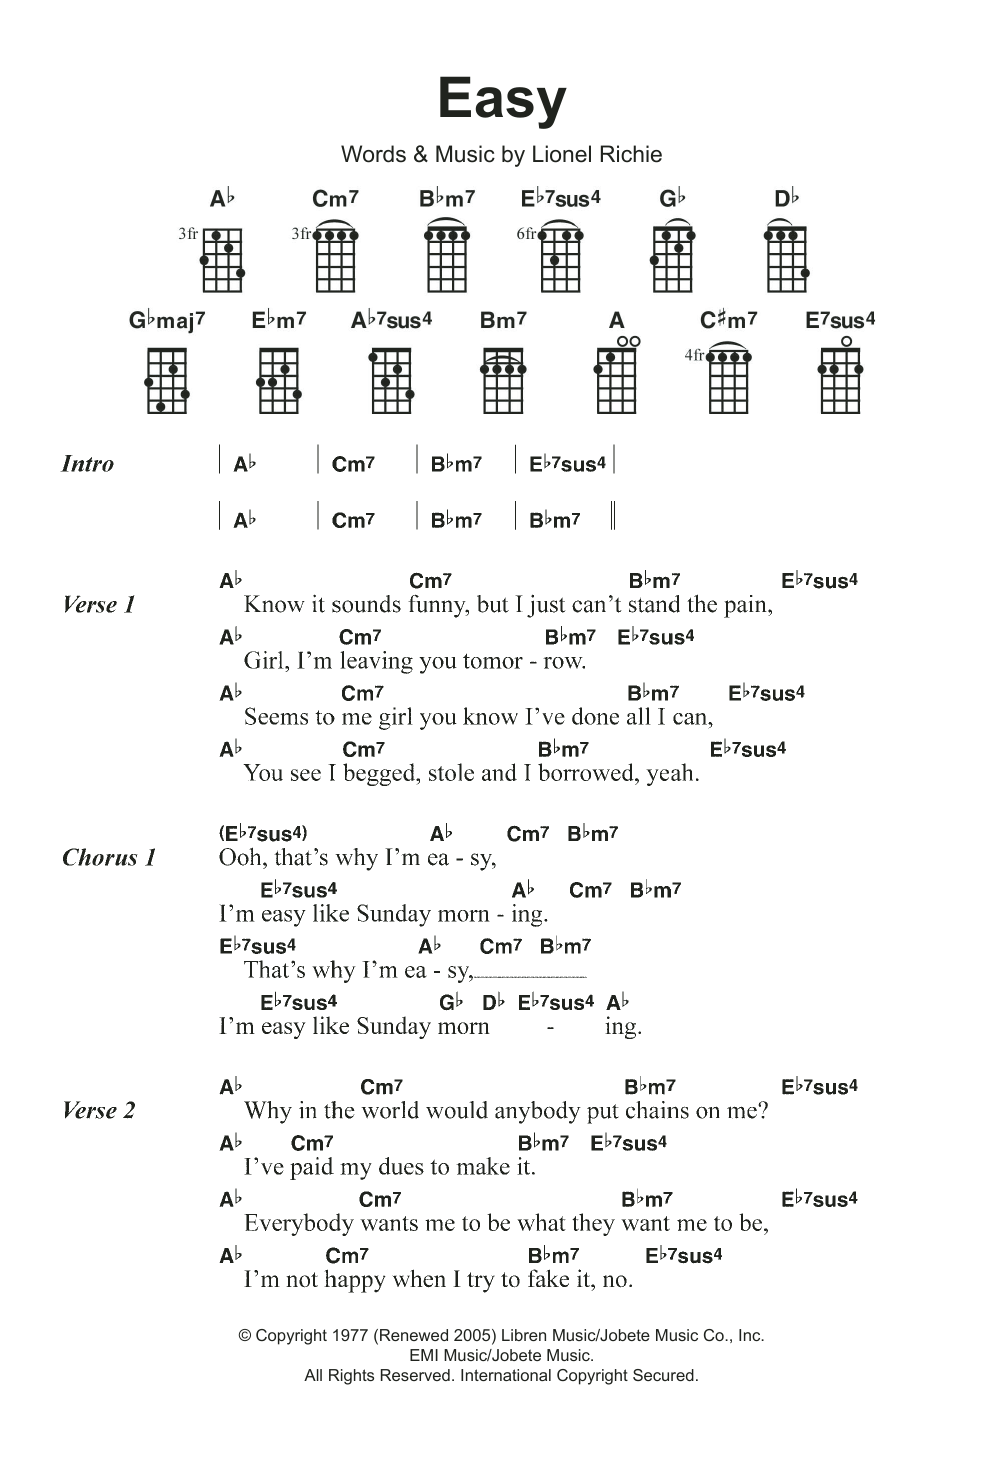 Download Commodores Easy Sheet Music